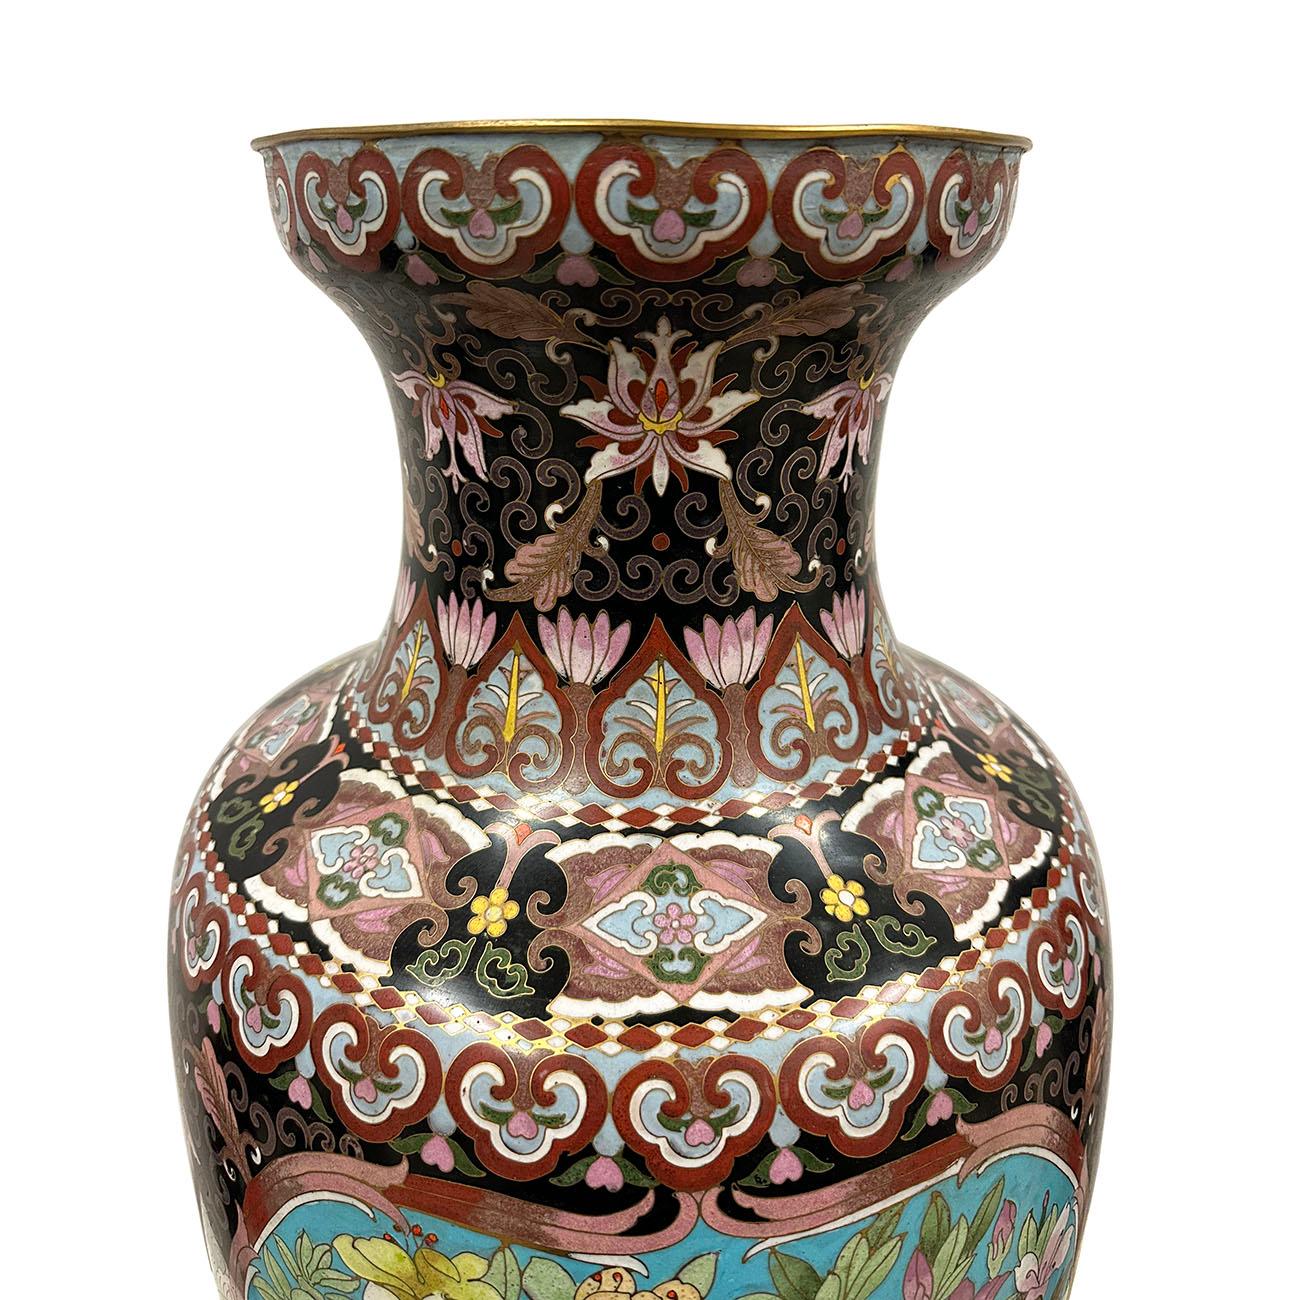 This Chinese Antique Cloisonne Vase was hand made from gold copper with cloisonne. It has detailed cloisonne works of Peony, Magpie and floral and decorated with clouds on it meaning health, lucky and Wealthy.  It is a truly antique and collectible